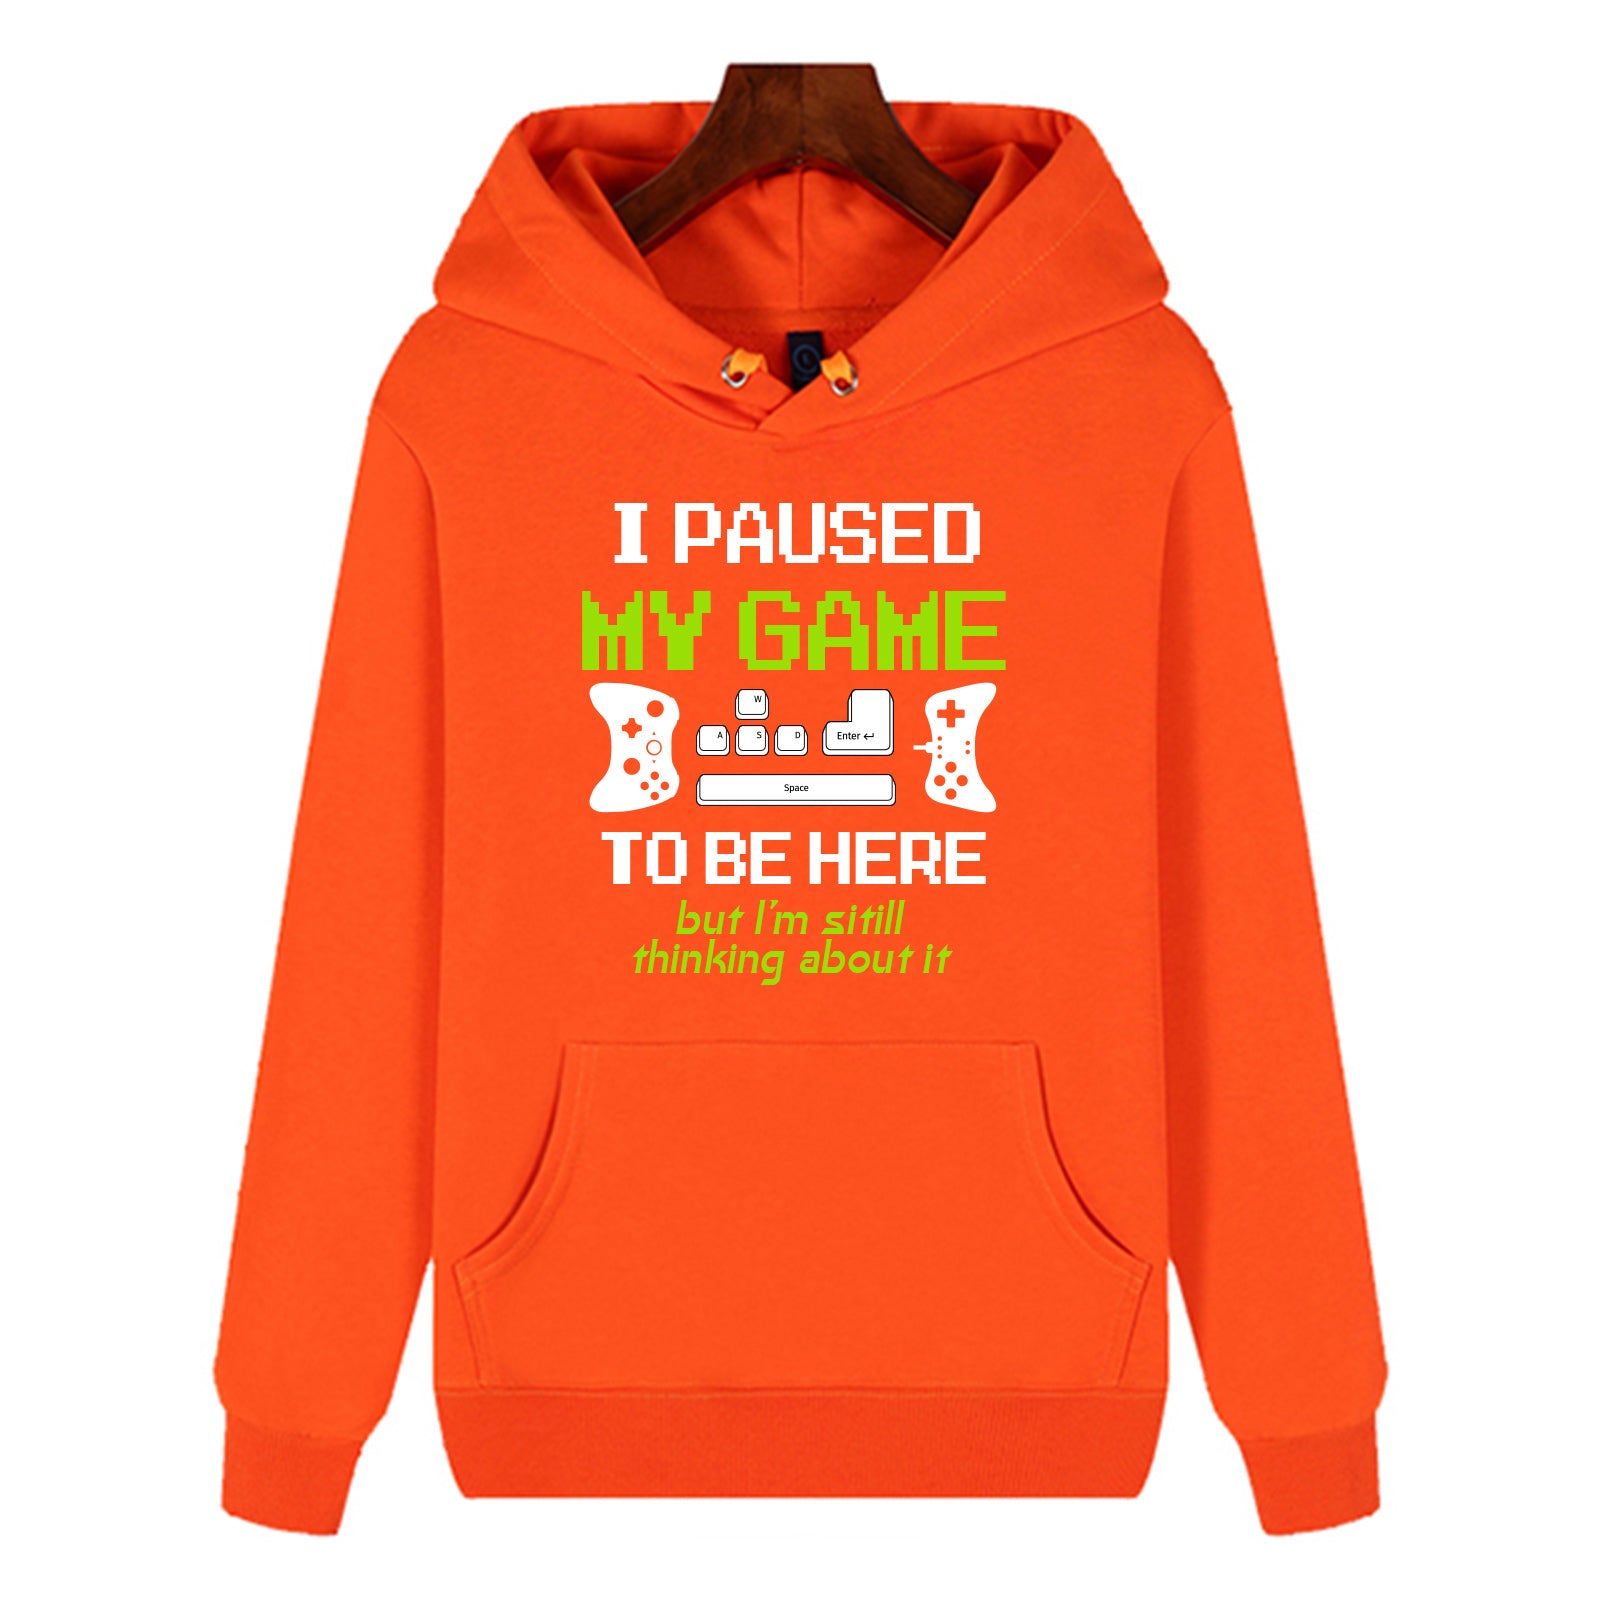 Oversized Sports Hoodie I PAUSED MY GAME TO BE HERE Hooded Sweatshirt